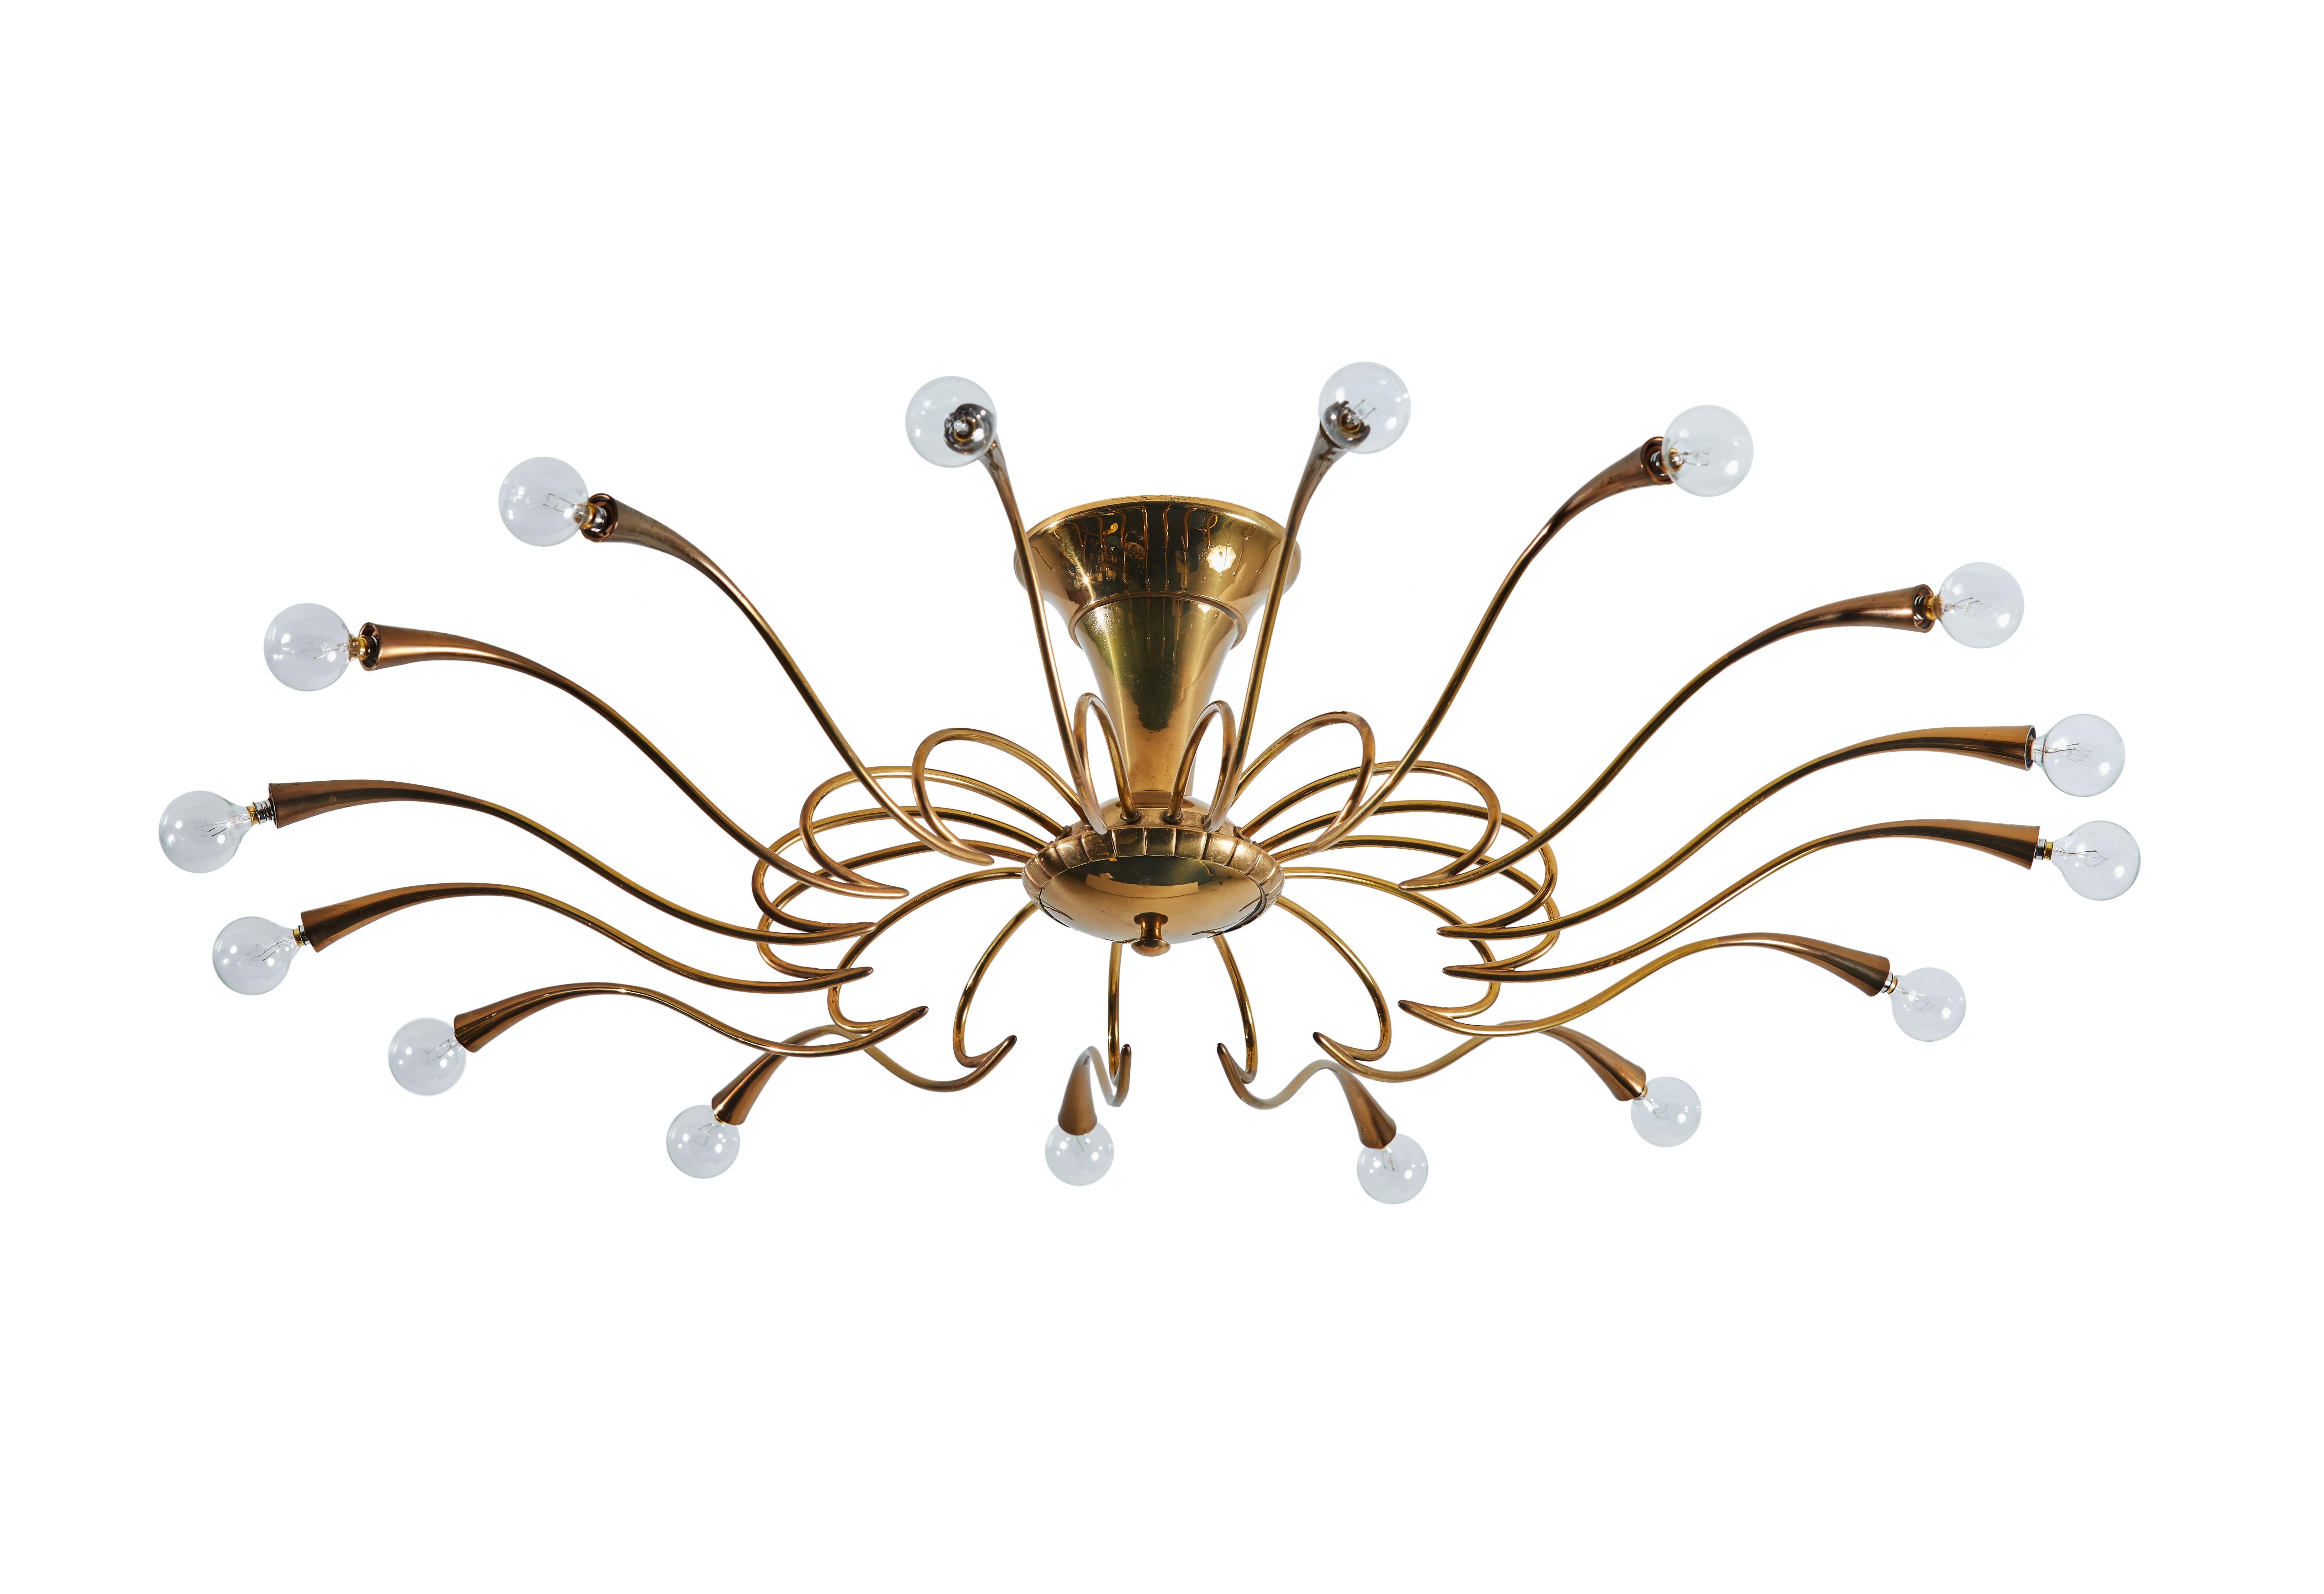 One flush mount chandeliers by Oscar Torlasco. Designed and manufactured in Italy, circa 1950s. Brass. Rewired for U.S. junction boxes. Takes sixteen E27 European candelabra 25w maximum bulbs. Bulbs provided as a onetime courtesy. Priced and sold